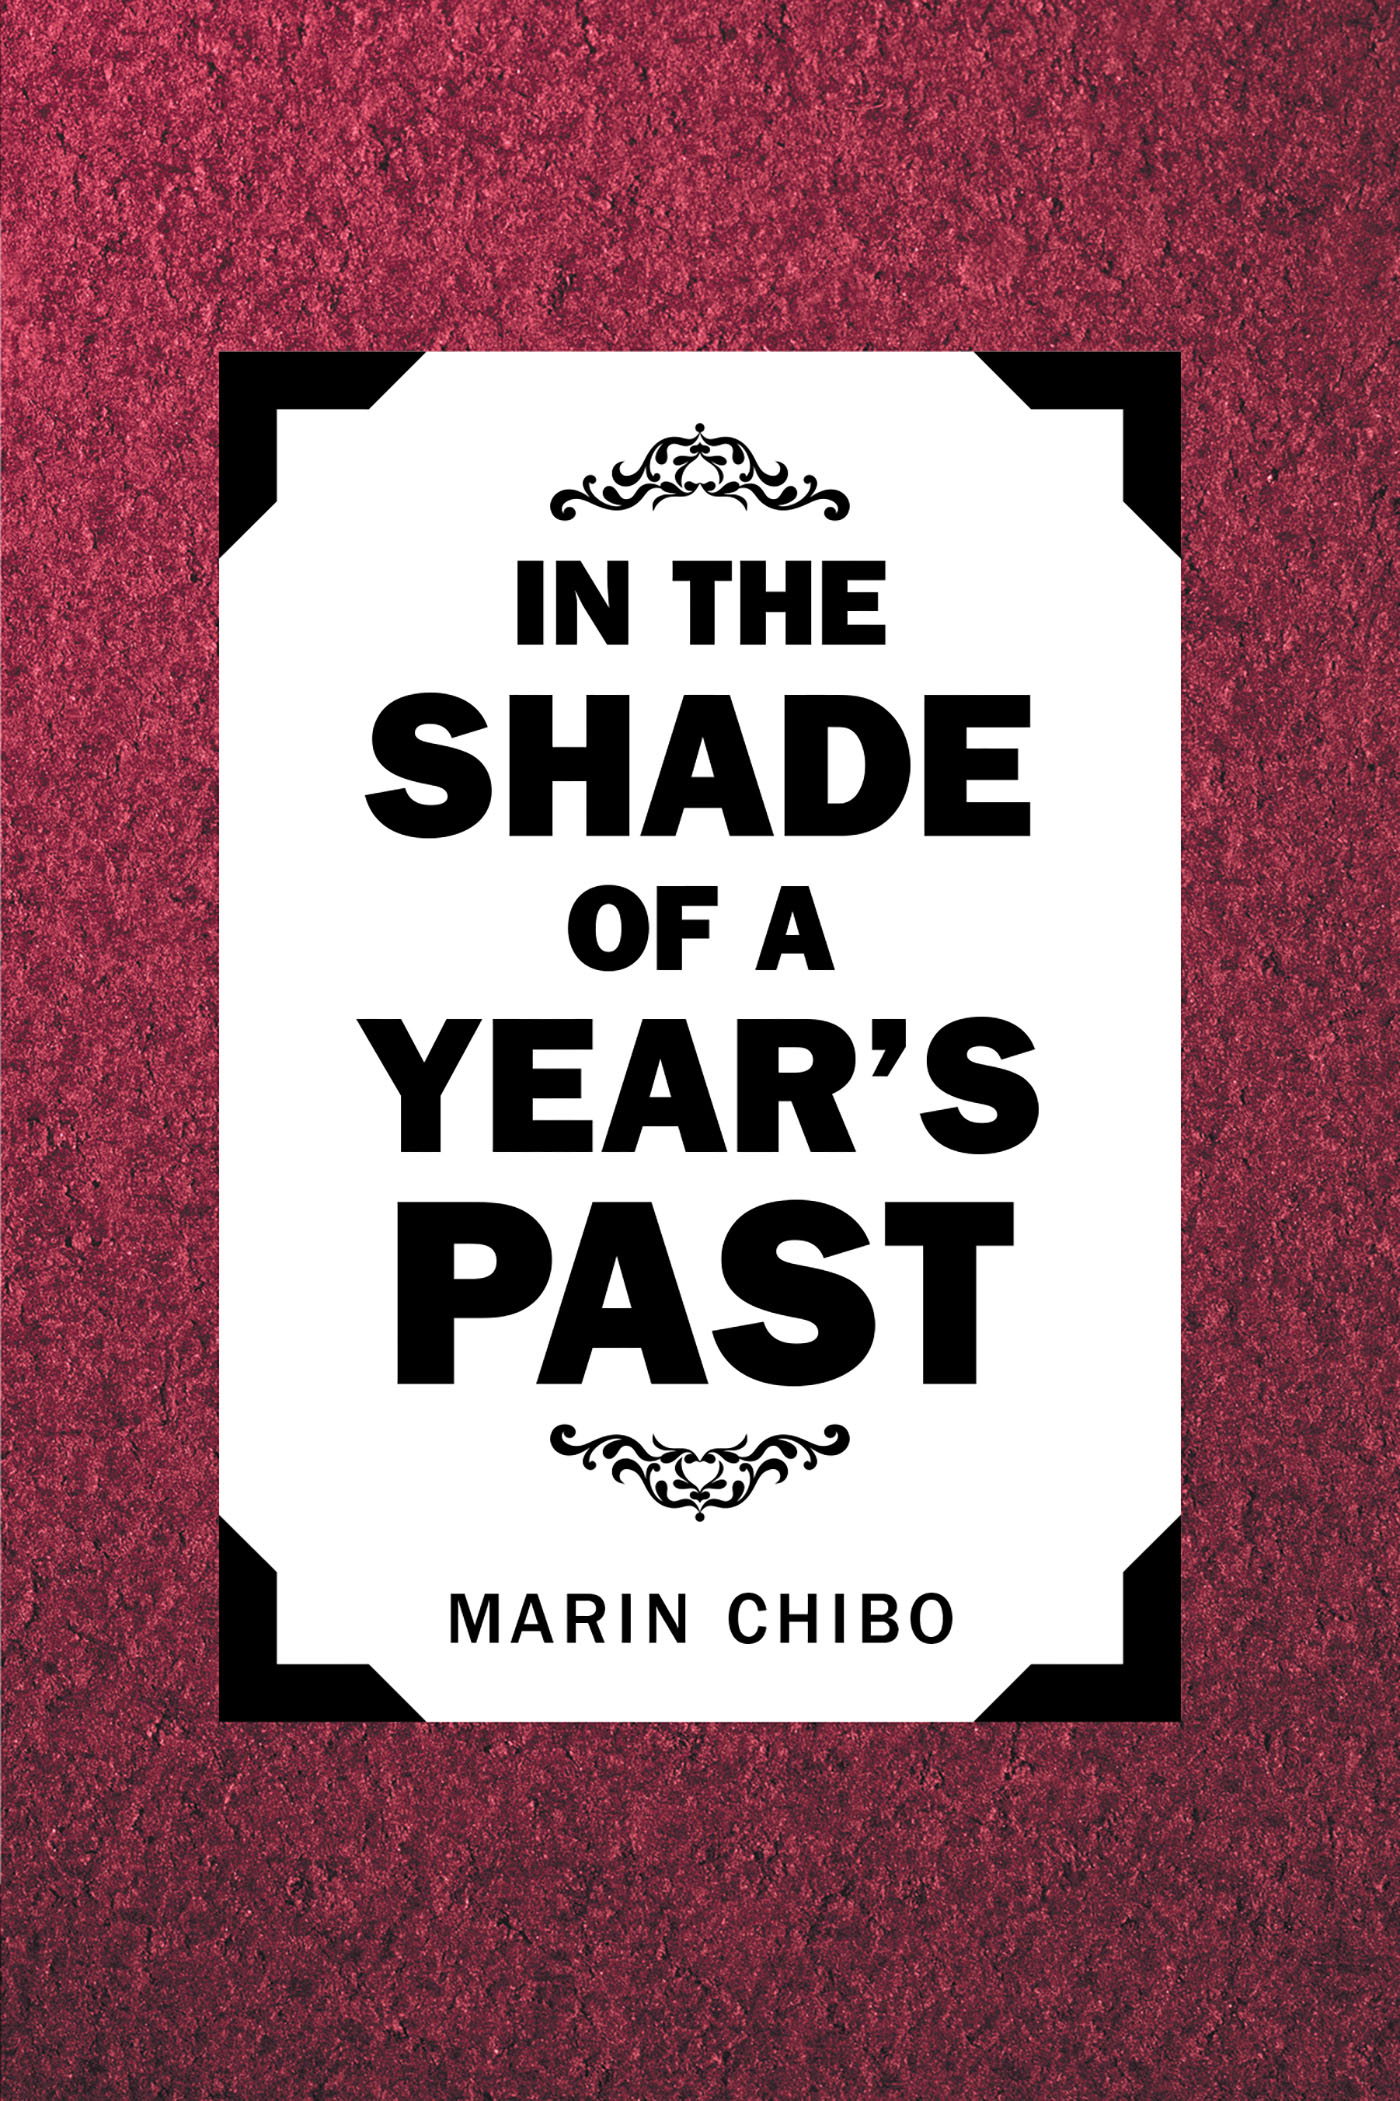 Author Marin Chibo’s New Book, "In the Shade of a Year’s Past," is a Powerful and Engaging Collection of Poetry Carrying the Author’s Experiences Through Its Many Poems